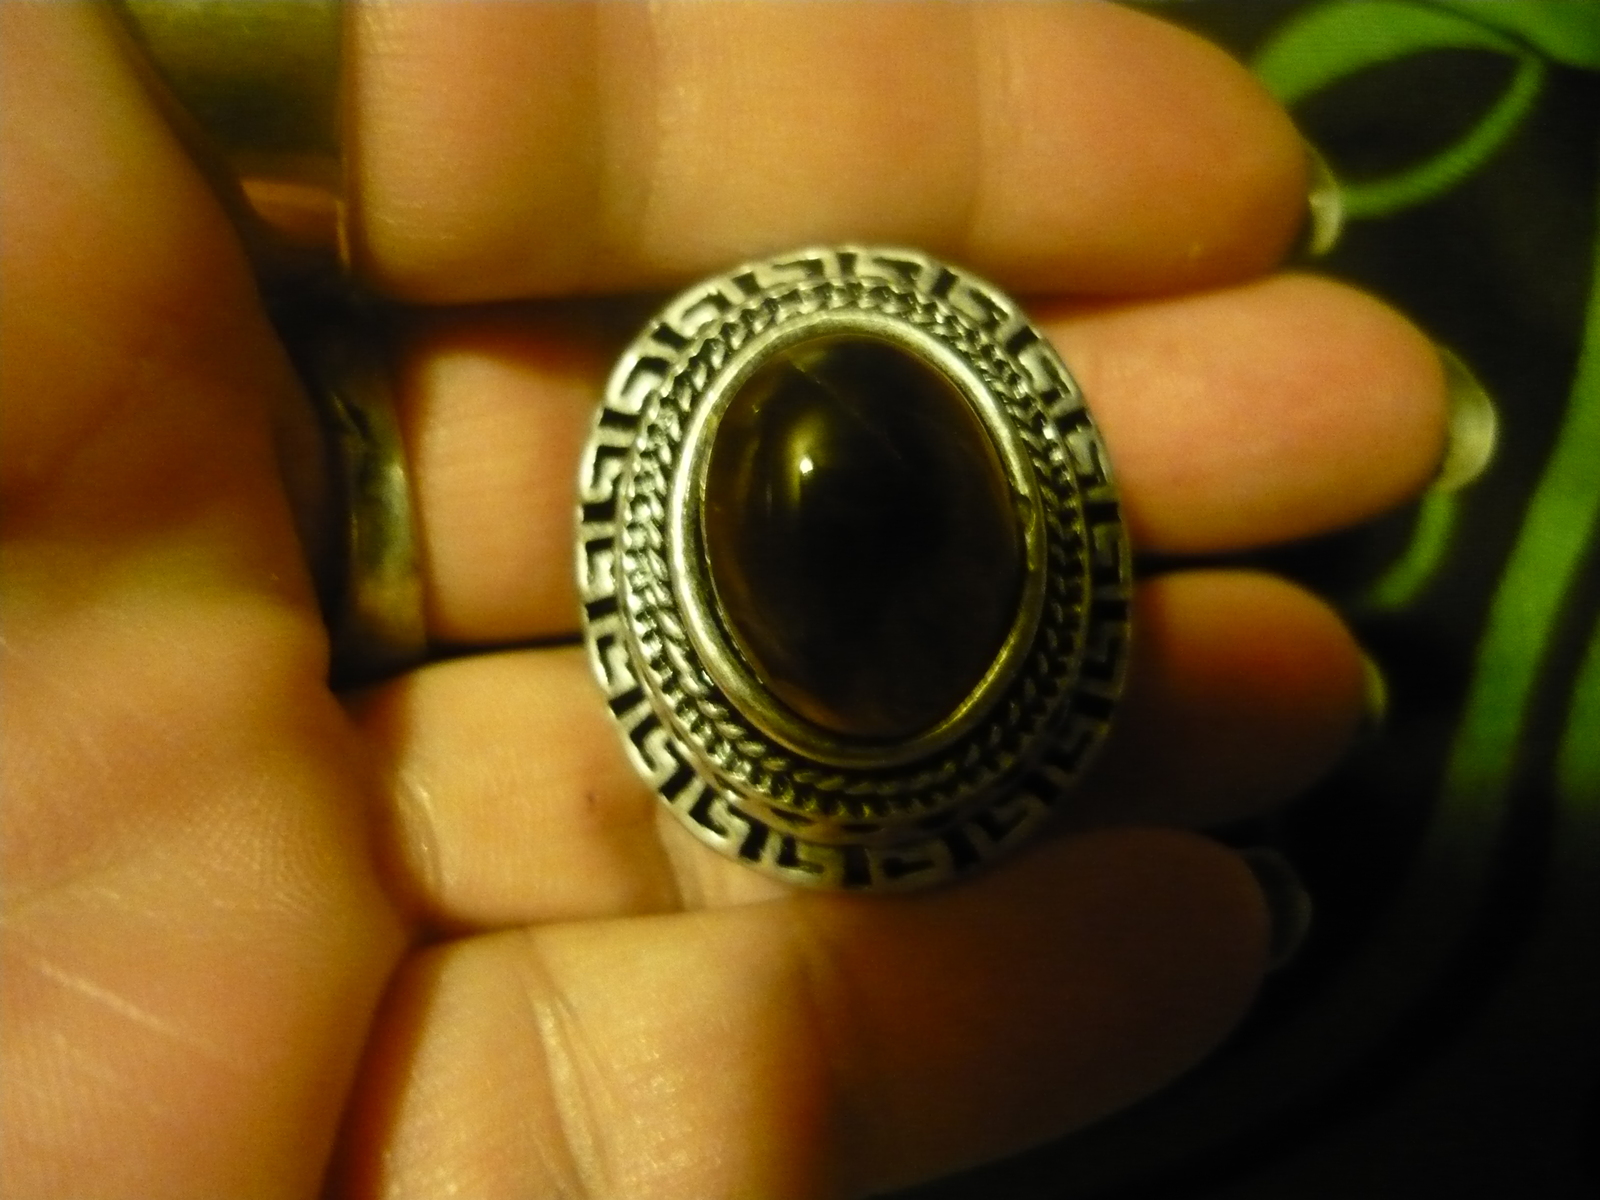 HAUNTED  MALE VAMPIRE ring size 8 STONE AT THE TOP SEEKS HIS COMPANION - $250.00